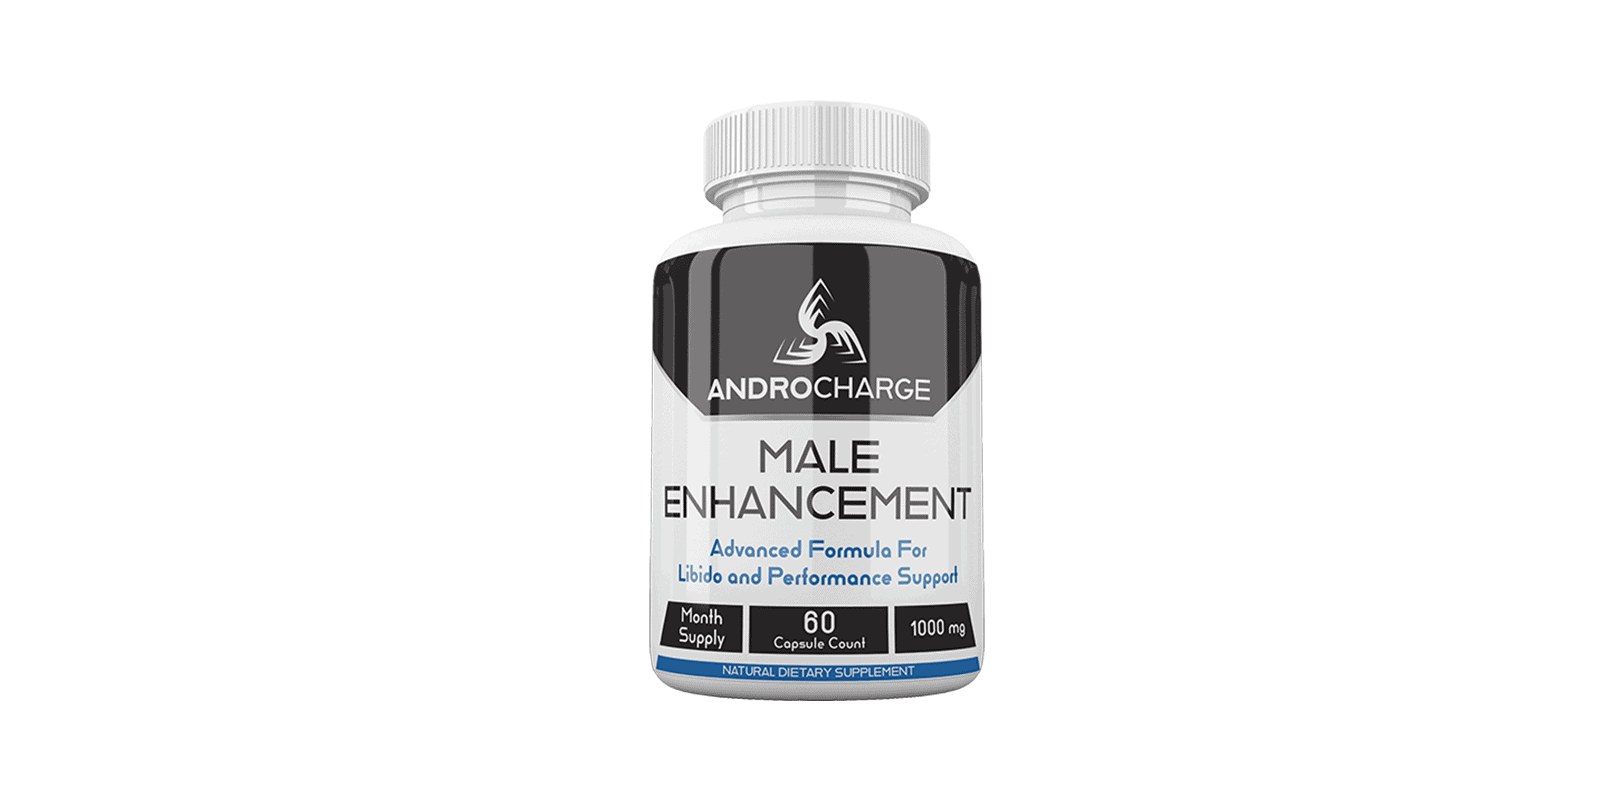 AndroCharge Male Enhancement reviews